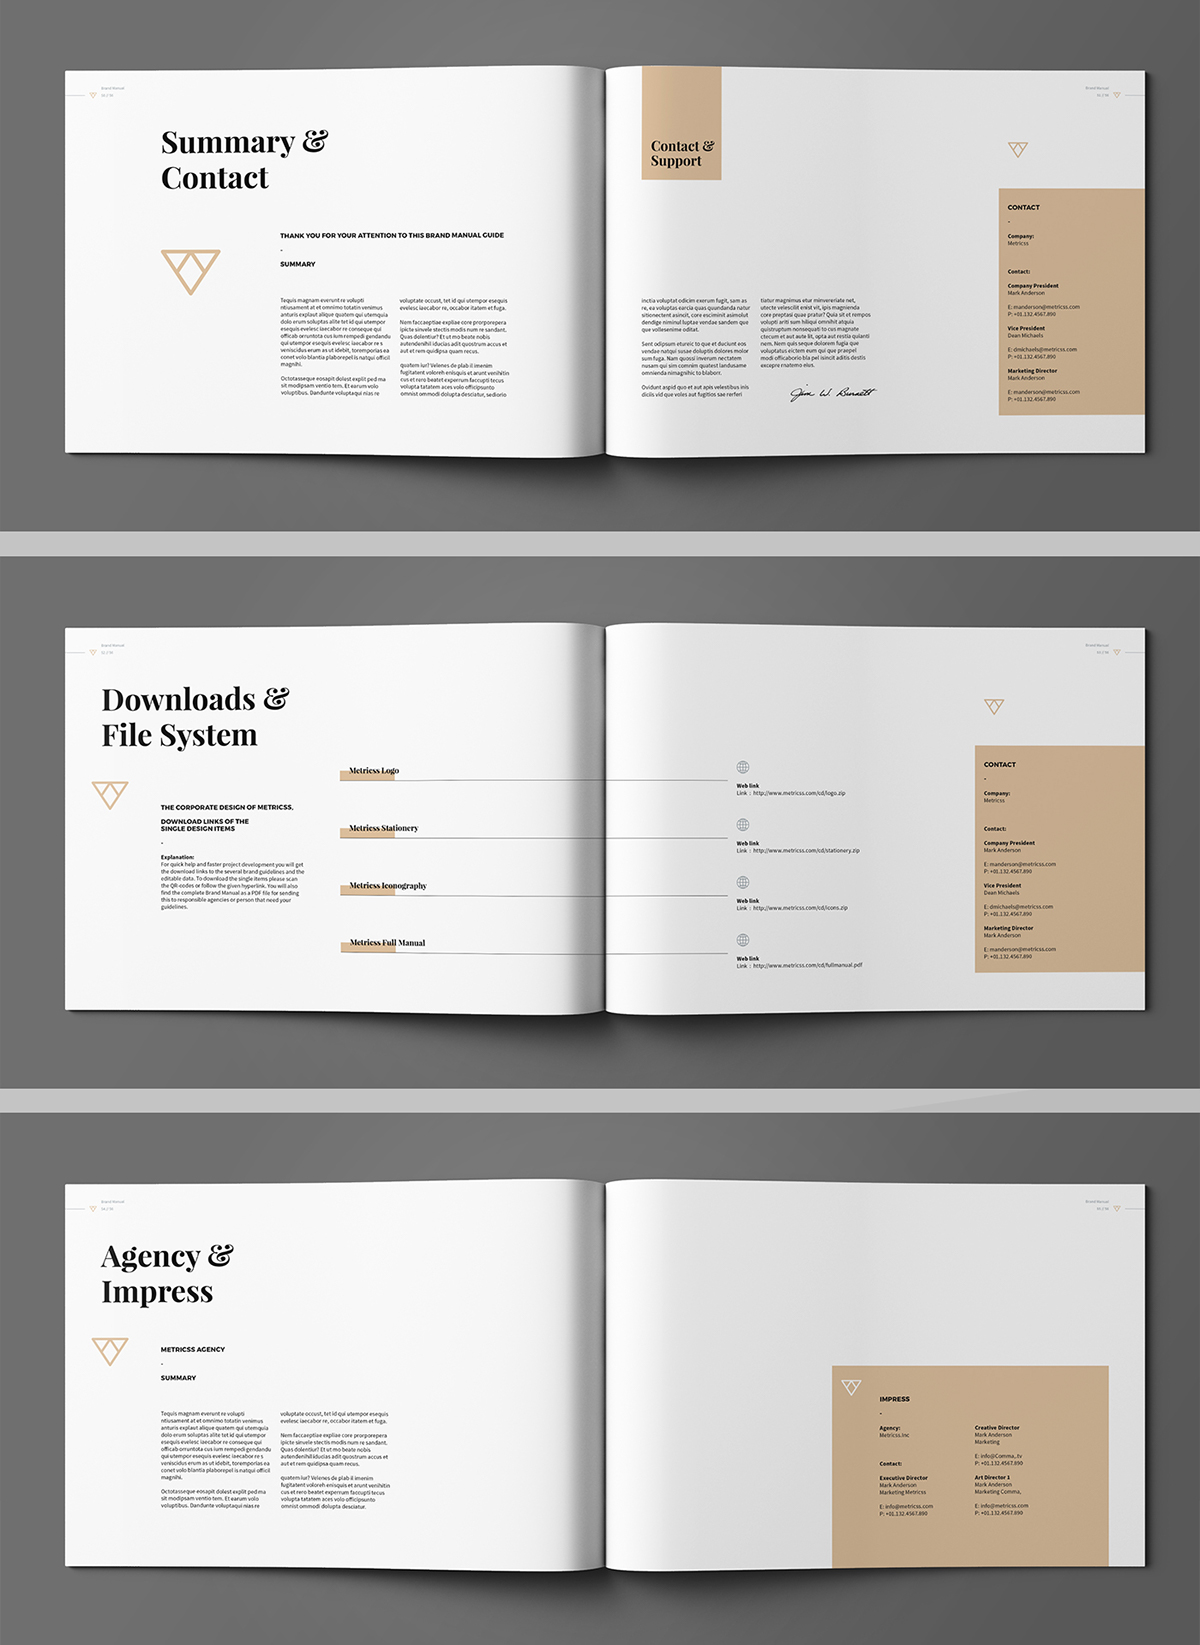 a4 agency brand brand guide brand manual guides brandbook colors Corporate Identity Guide guidelines horizontal identity Landscape manual Proposal